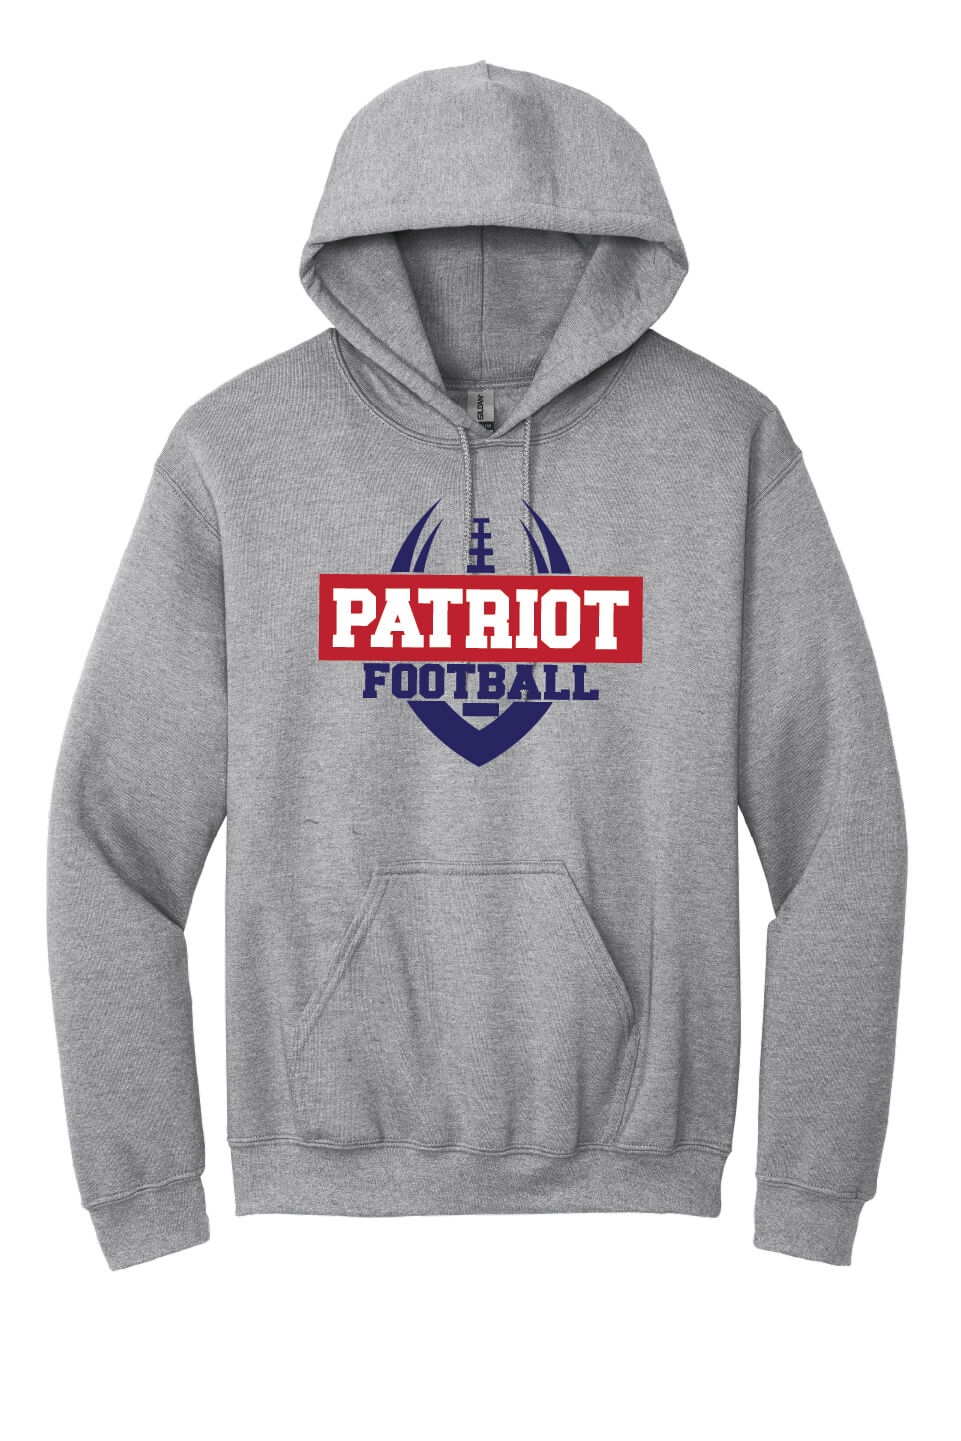 Patriot Football Hoodie (Youth) gray